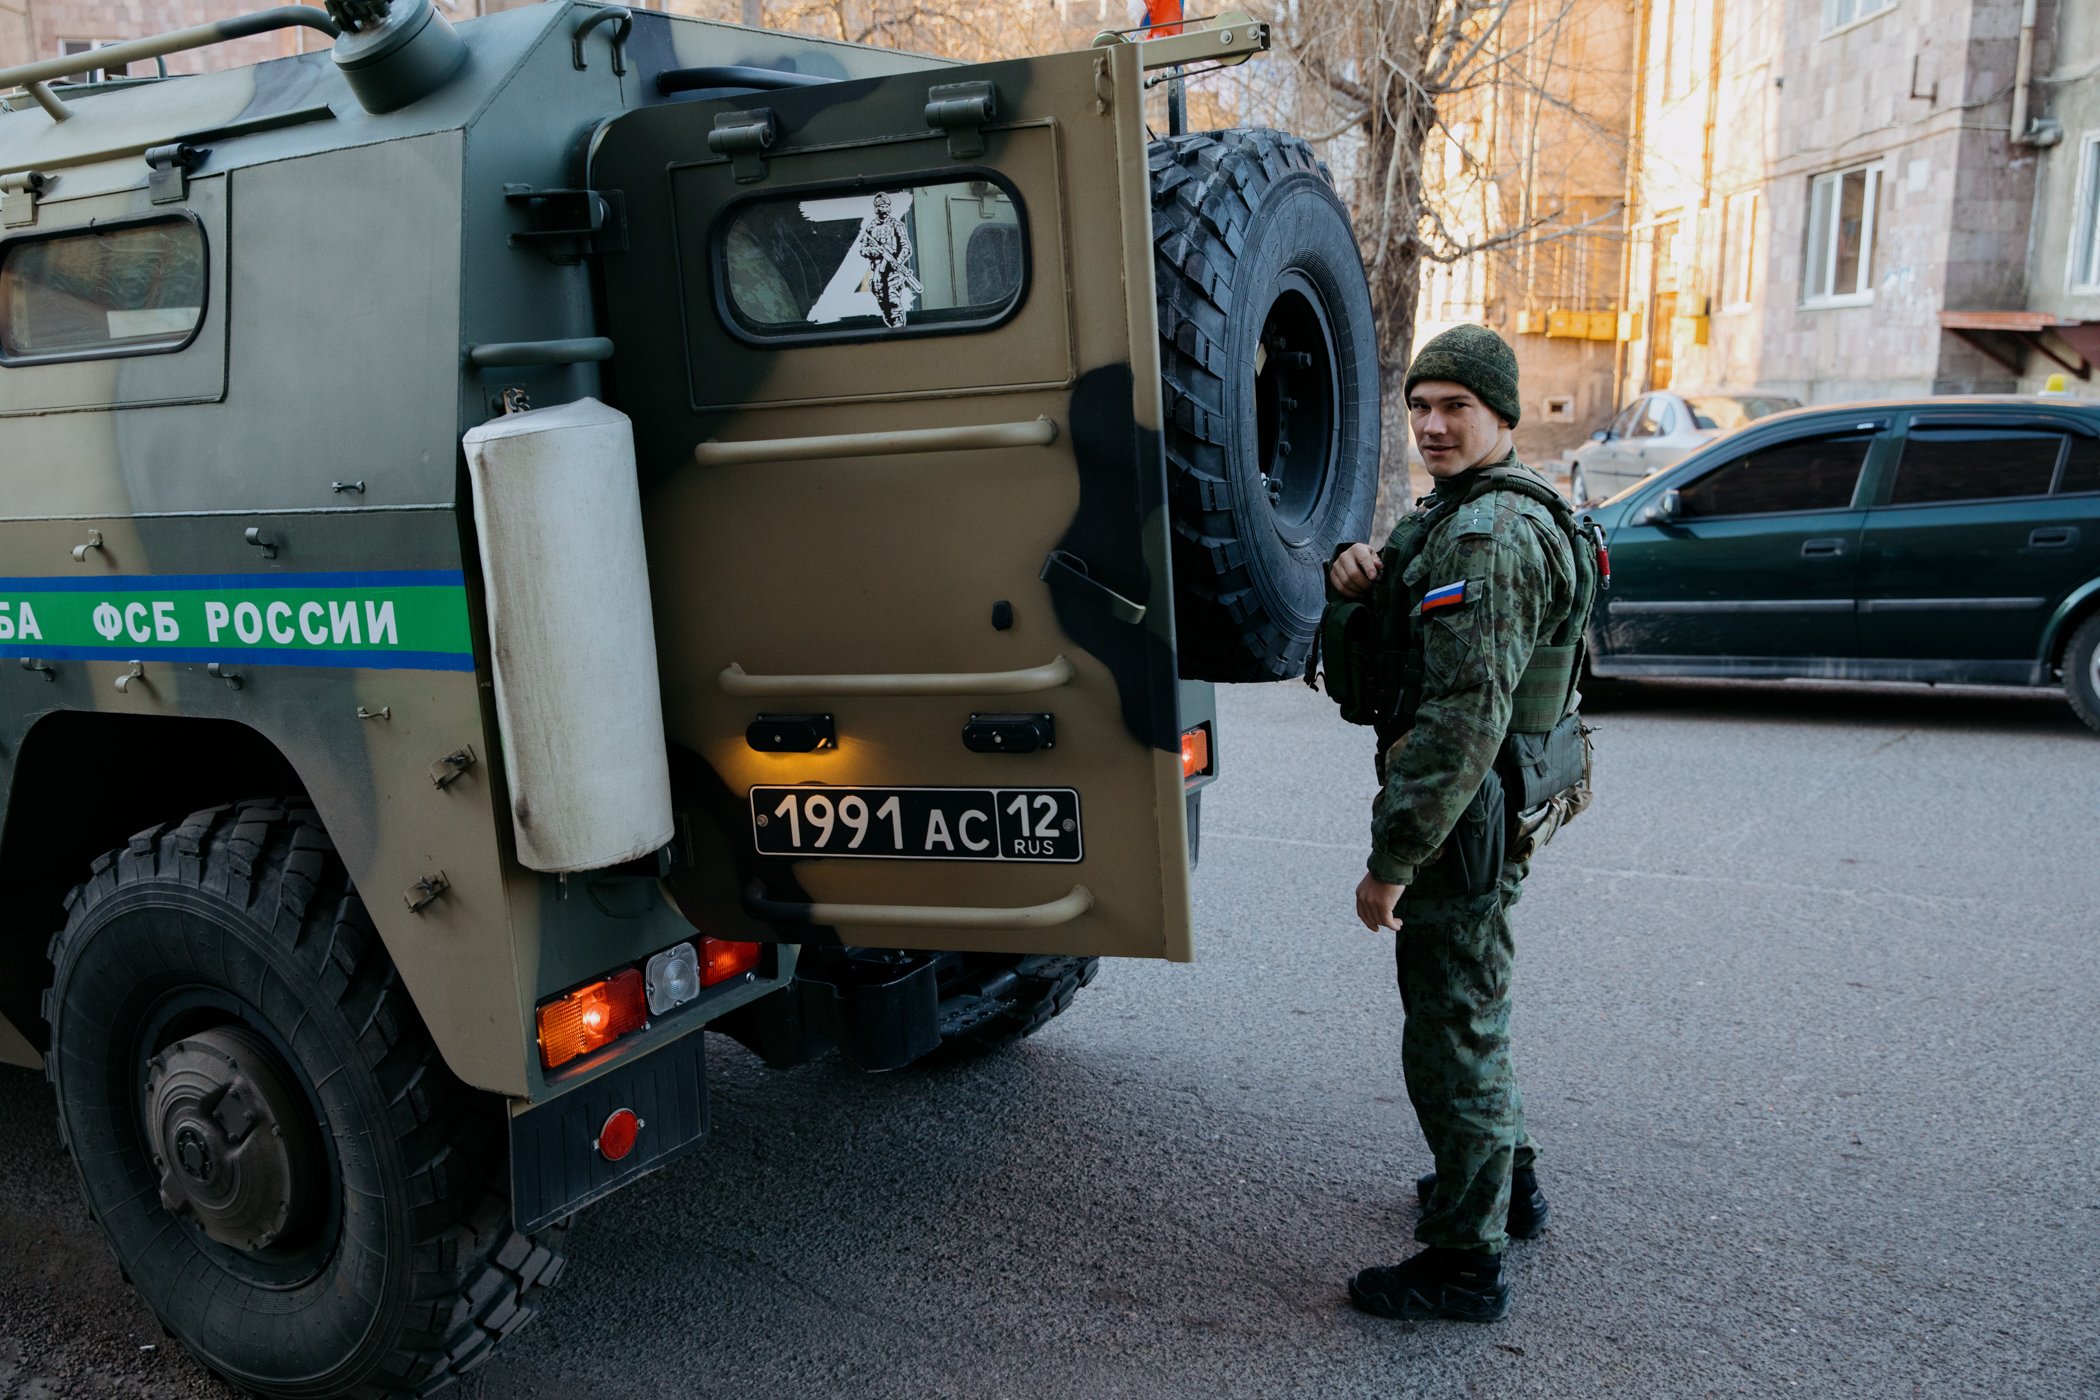  A Russian soldier in the centre of Goris. The Russian peackeeping force was set up as part of the ceasefire agreement following the 2020 Nagorno-Karabakh War. It operates in the Lachin Corridor and along the line of contact between Nagorno-Karabakh 